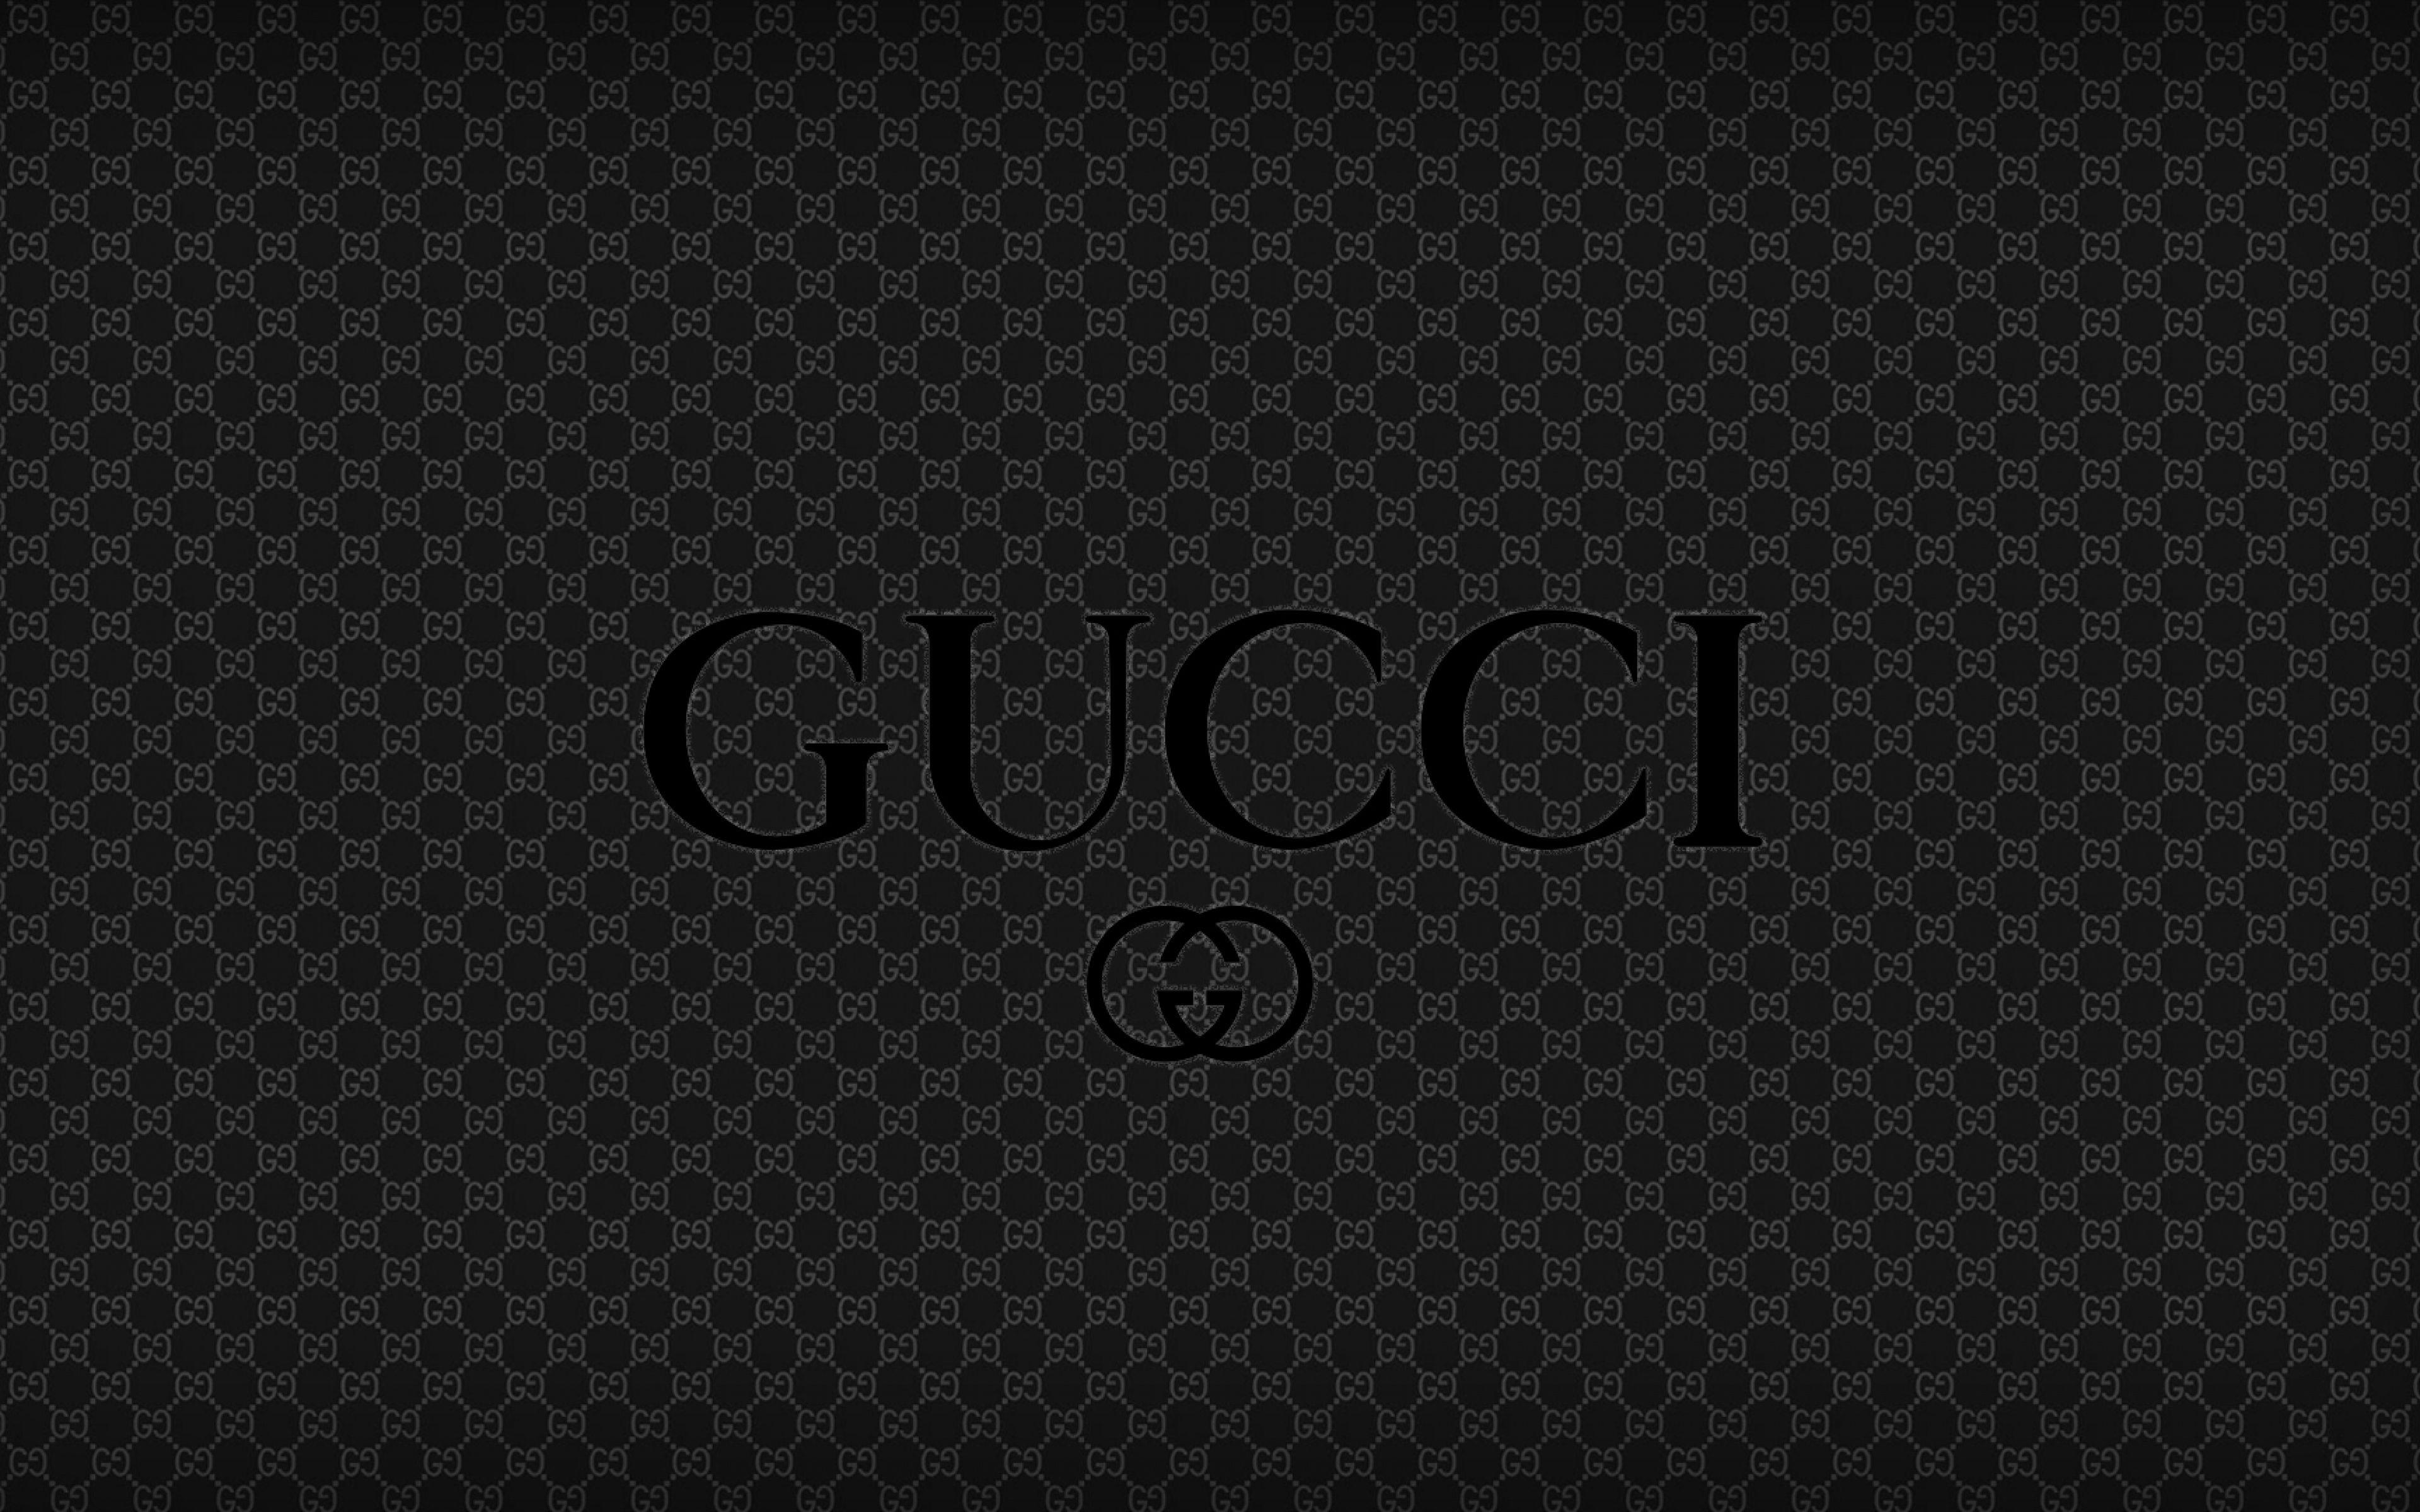 Gucci Wallpapers For Computer